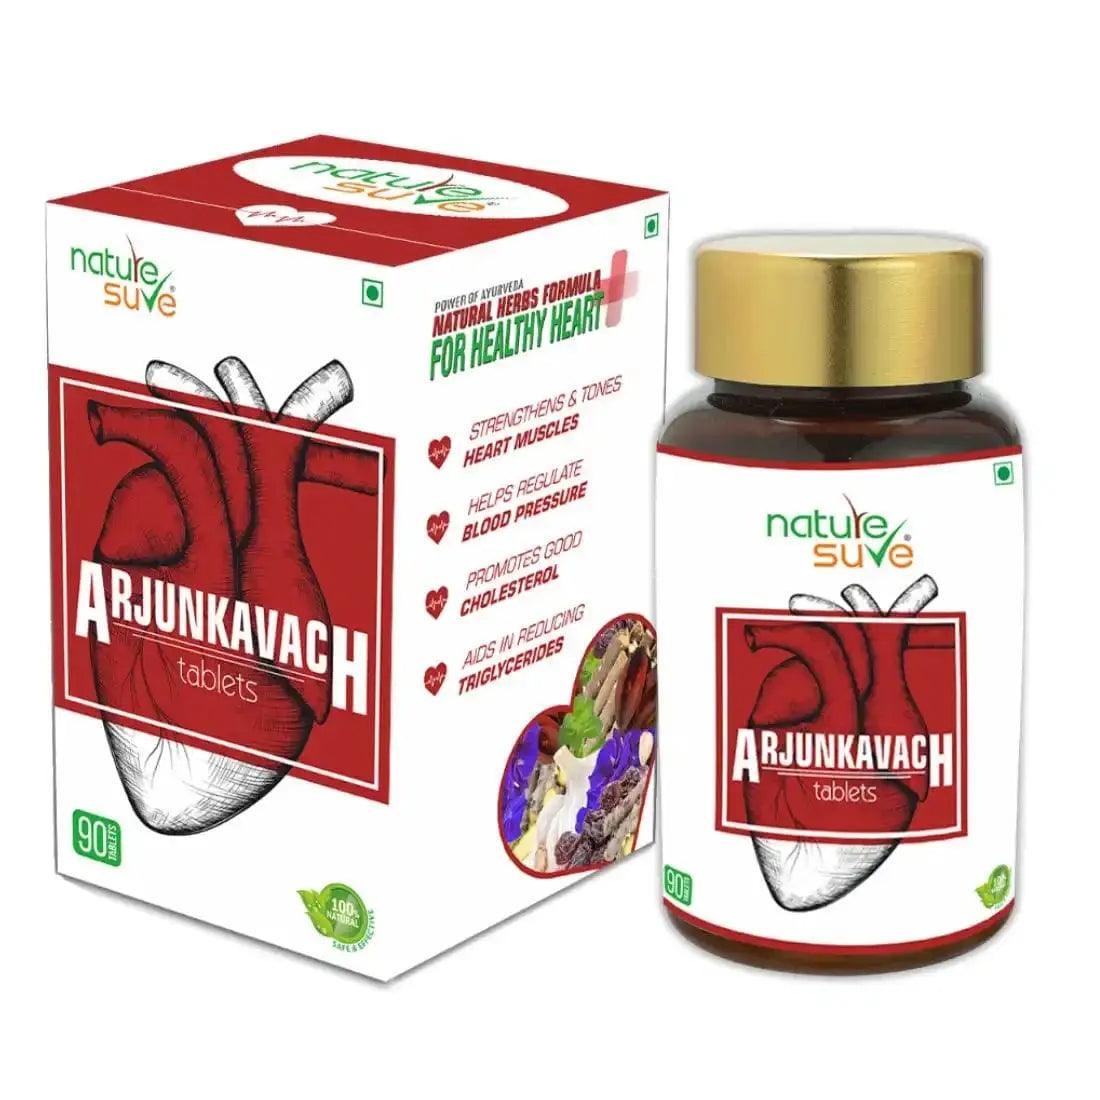 Buy 1 Pack of Nature Sure Arjun Kavach Tablets for Healthy Heart in Men and Women